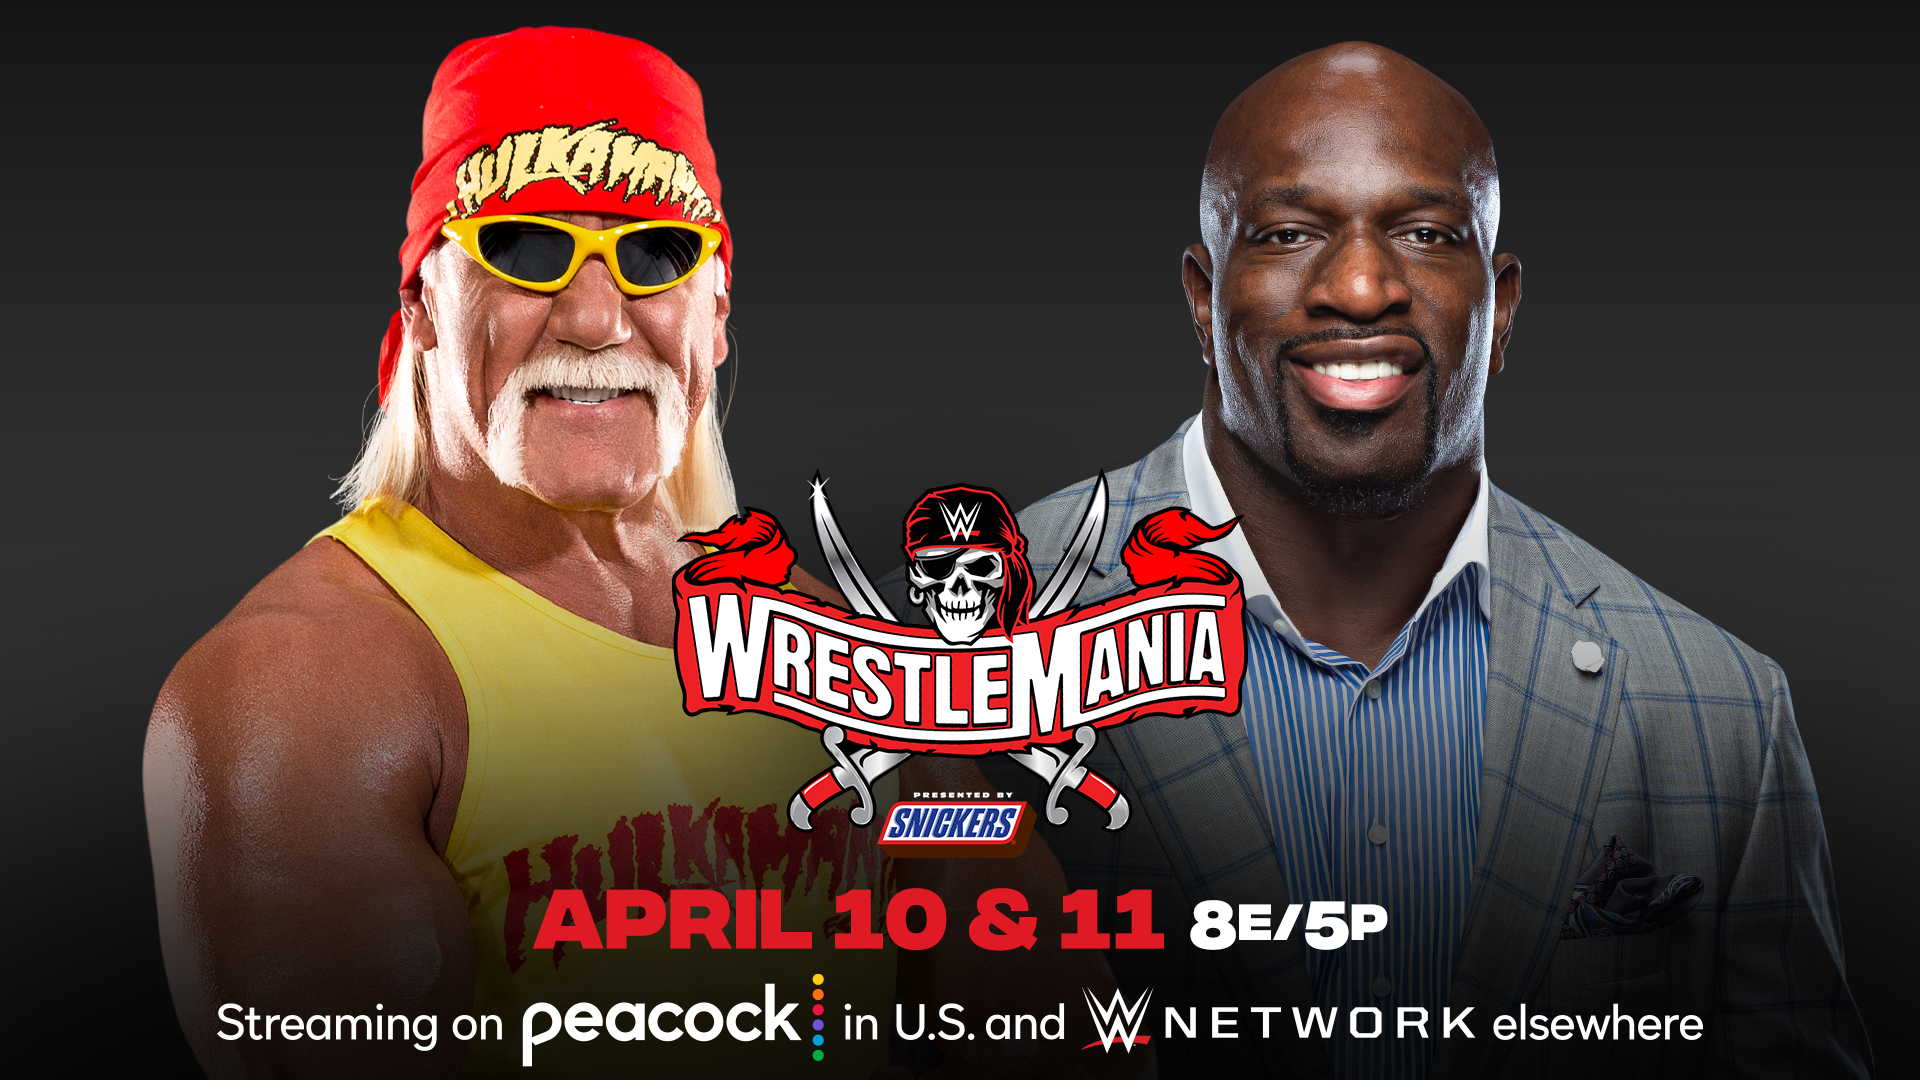 Wrestlemania 2021 Live stream, start time, TV schedule, price, how to watch WWE championships, hosted by Hulk Hogan